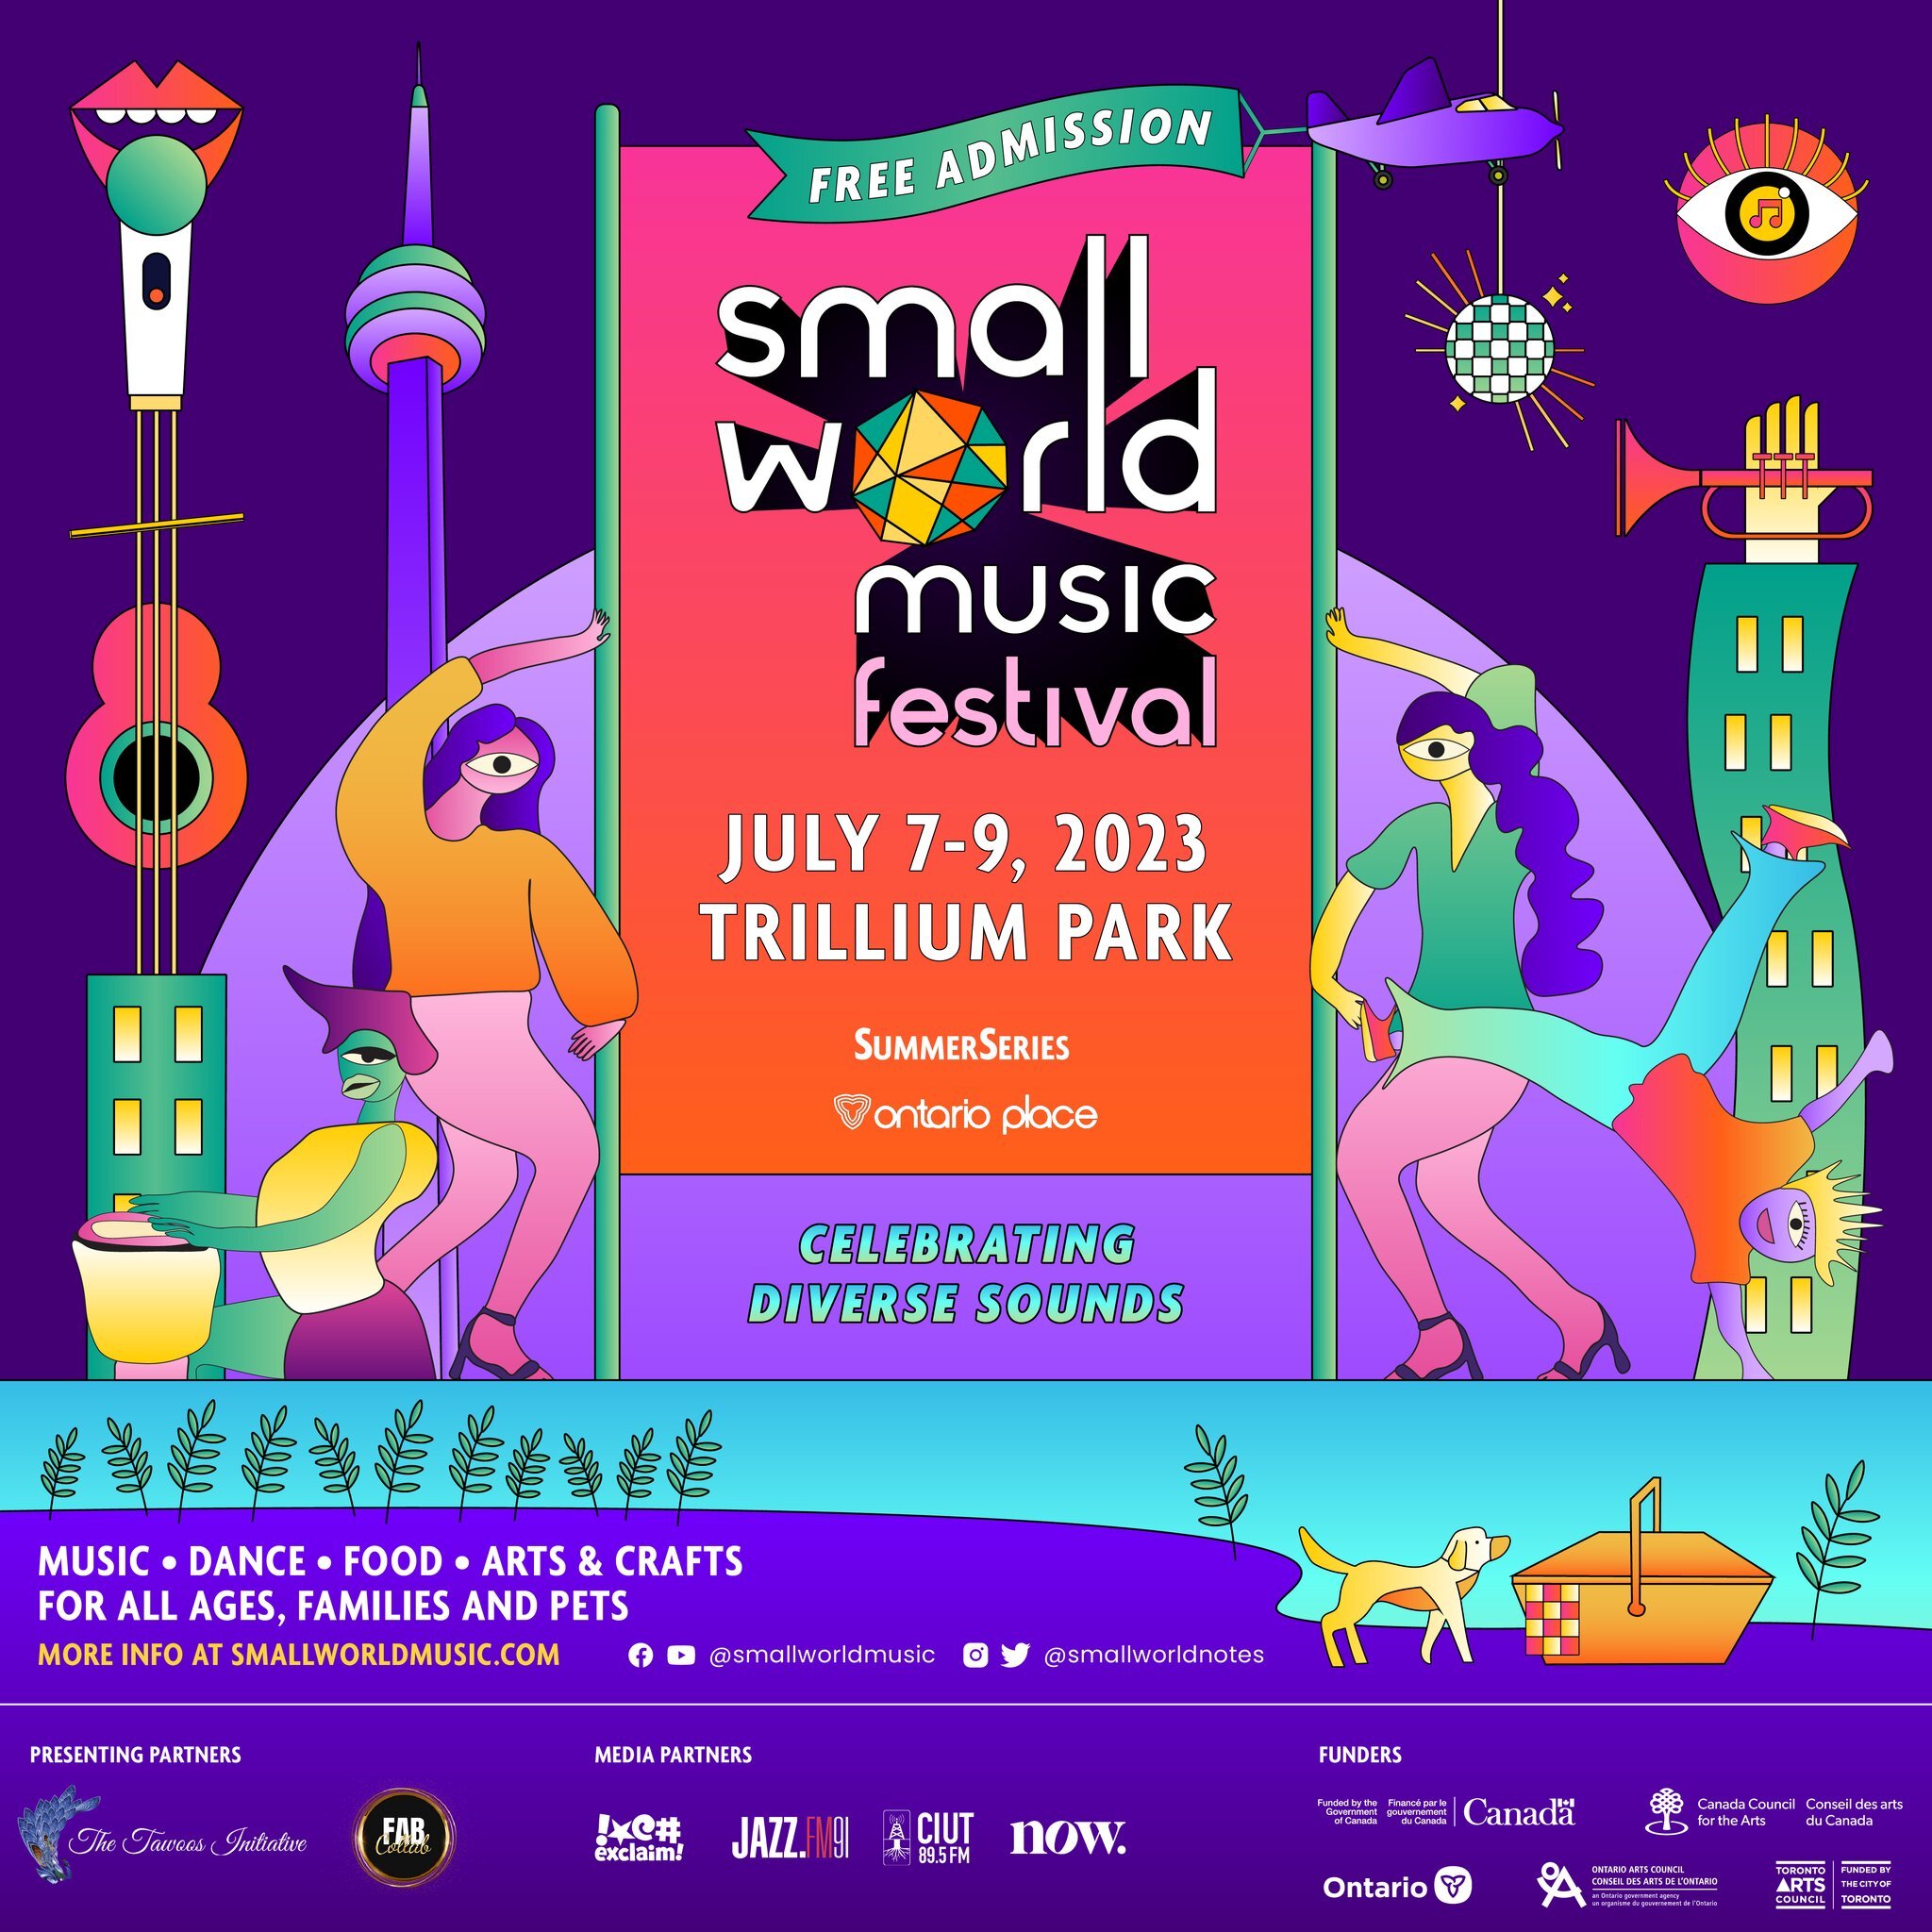 ✨ Small World Music Festival 2023! Celebrating Diverse Sounds

Our friends at @smallworldnotes are back with their #SmallWorldMusicFestival2023. Taking place July 7th through 9th at Trillium Park, you can join them for a FREE, outdoor, family-friendl